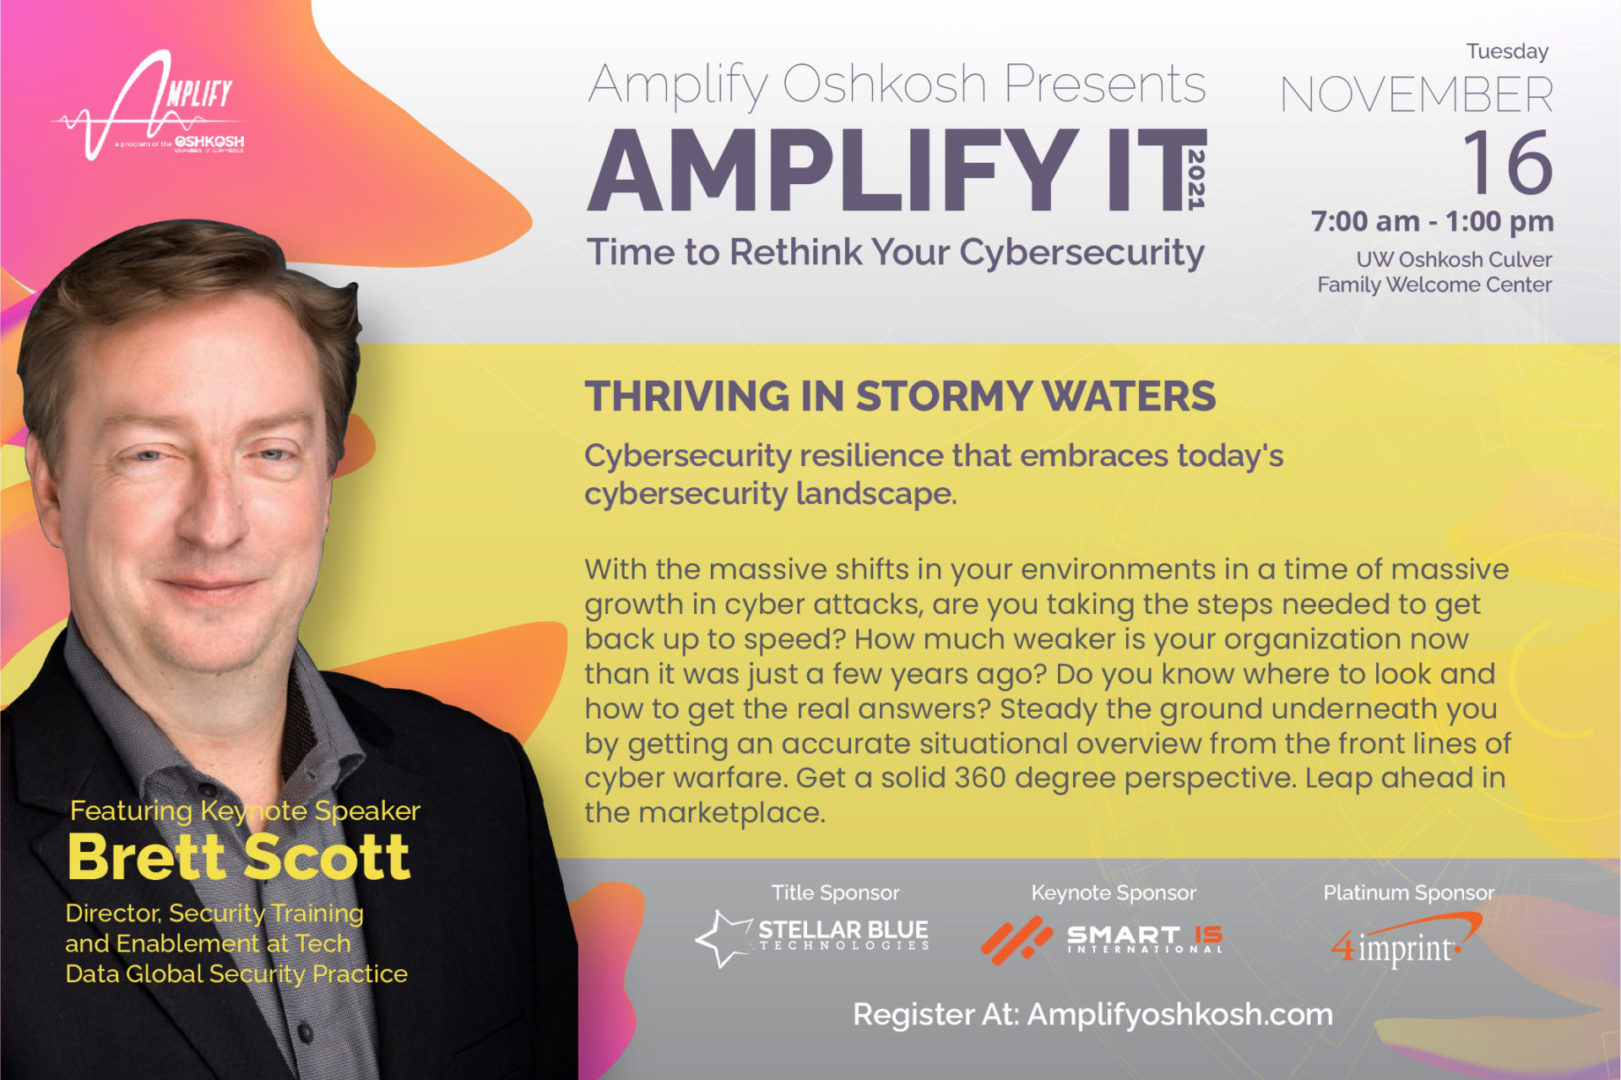 Amplify IT 2021 Cybersecurity Conference